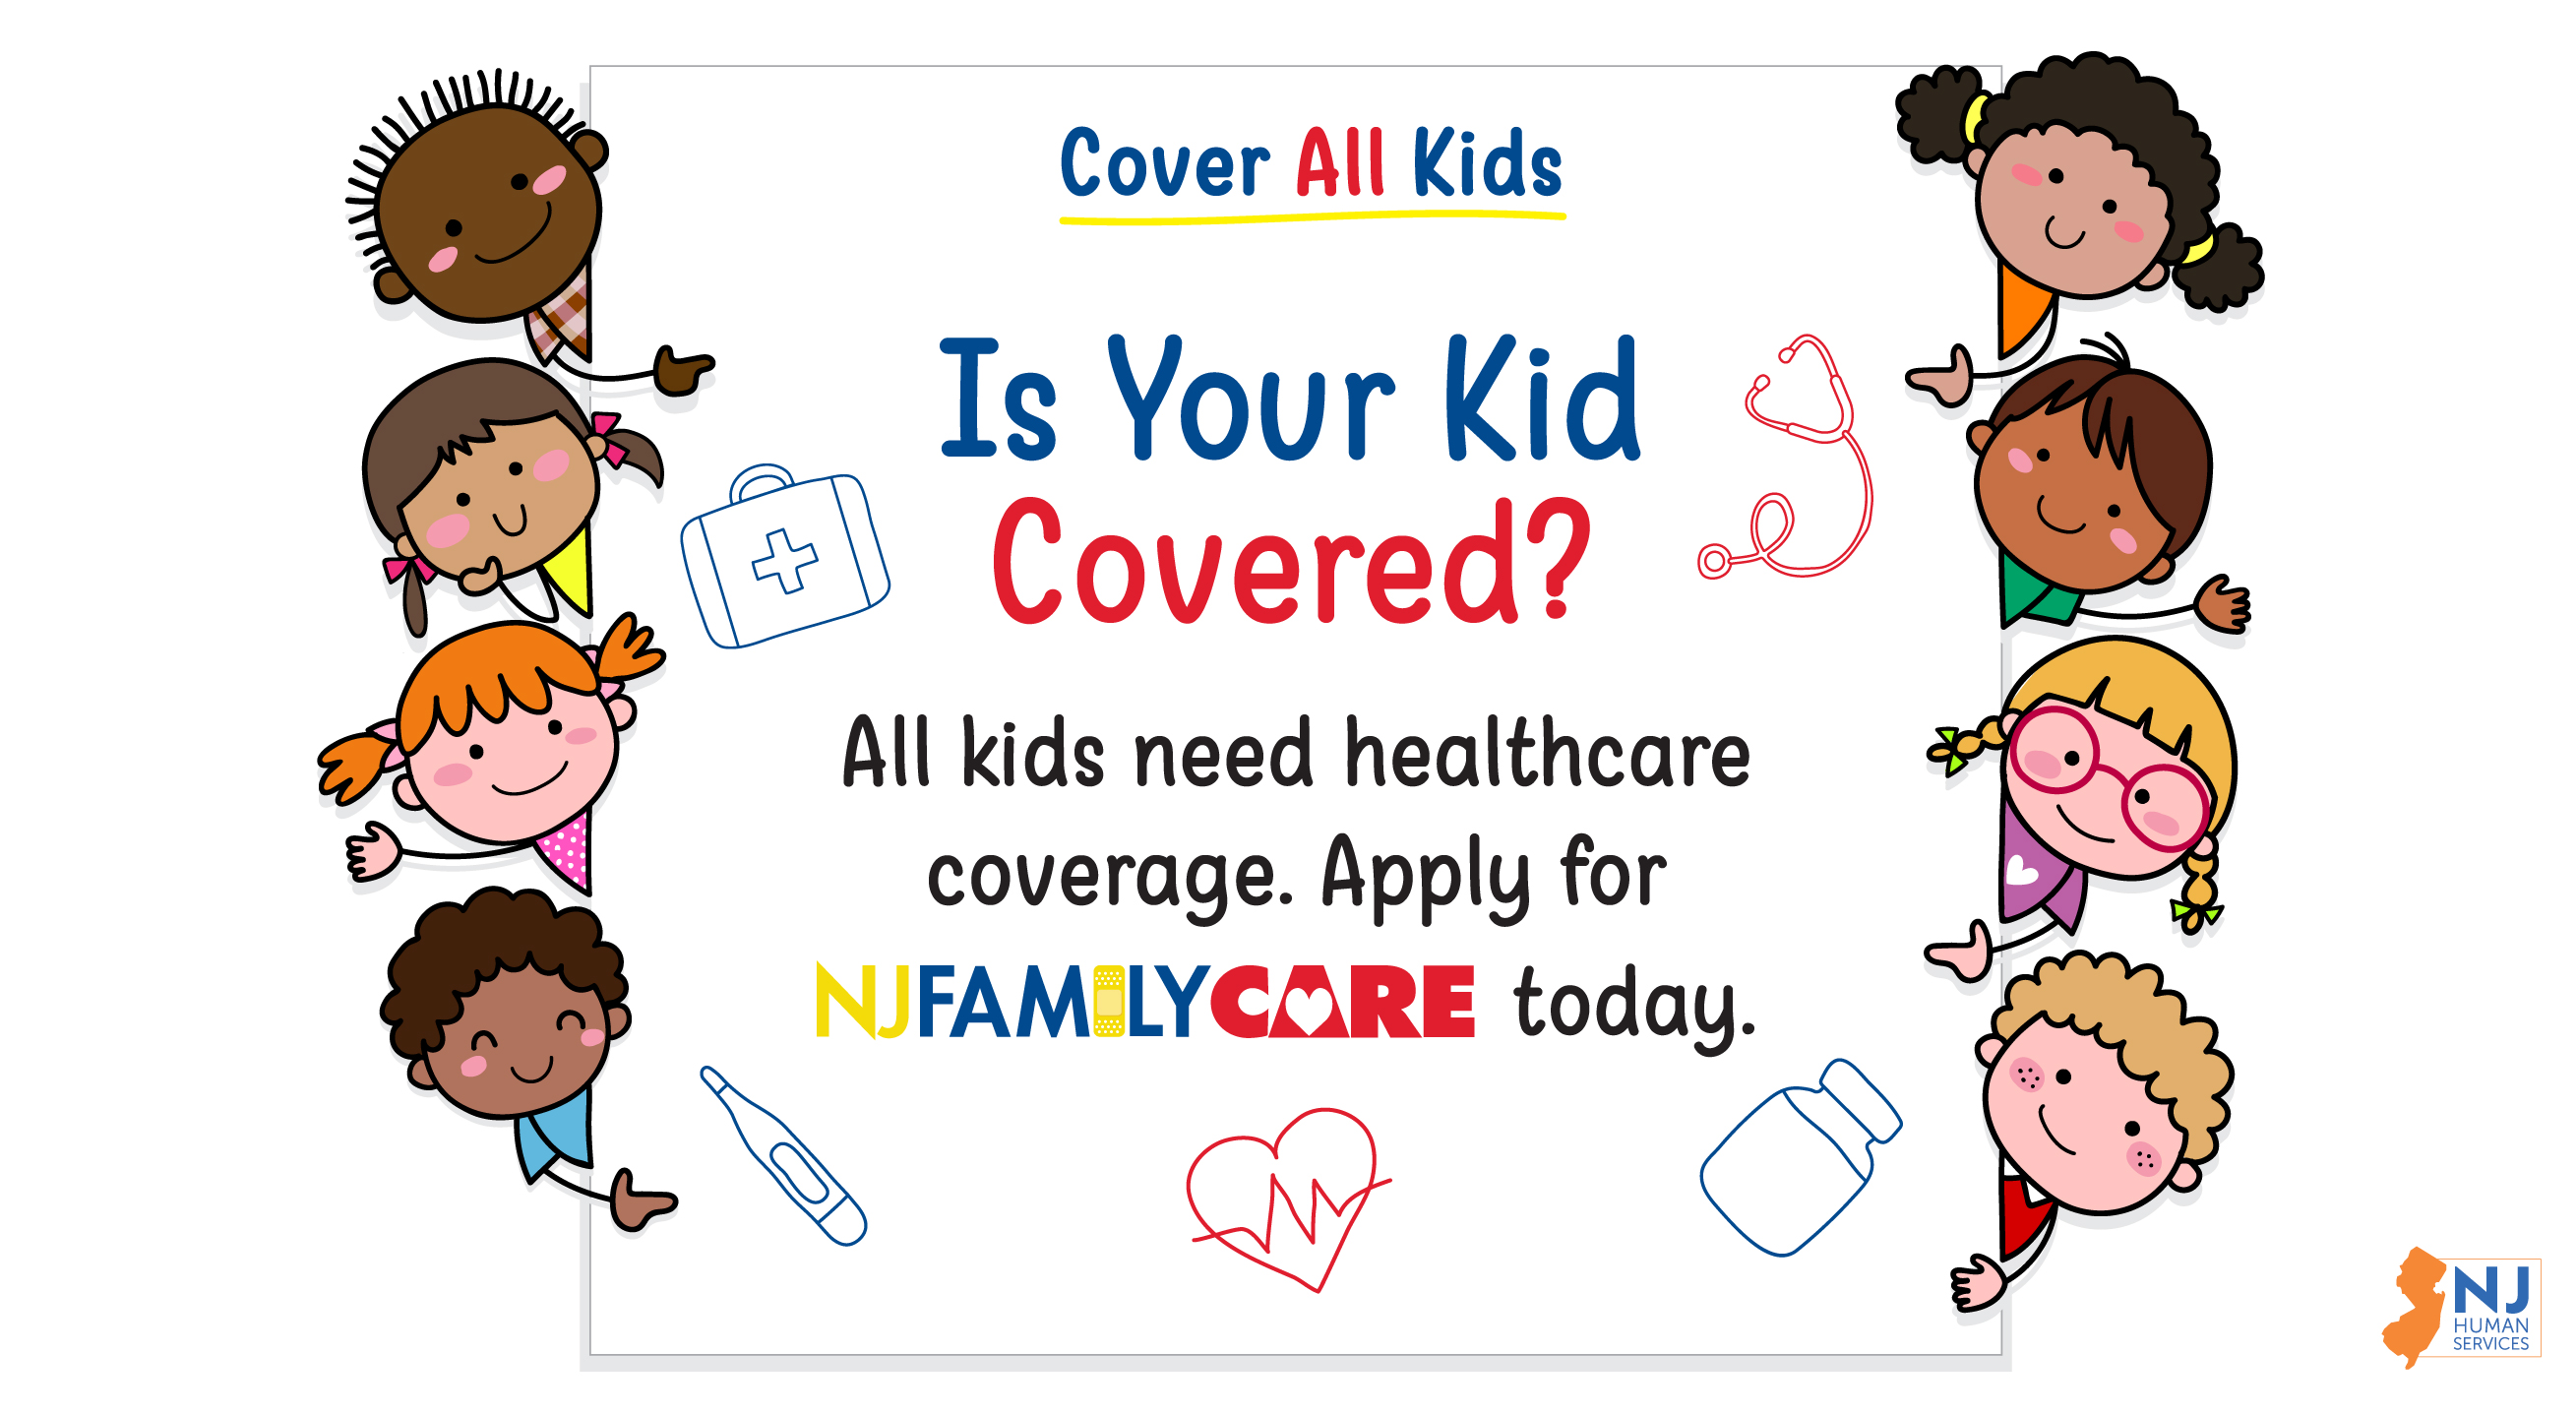 Gov Expands Eligibility for NJ FamilyCare as Admin Continues Efforts to Cover All Kids